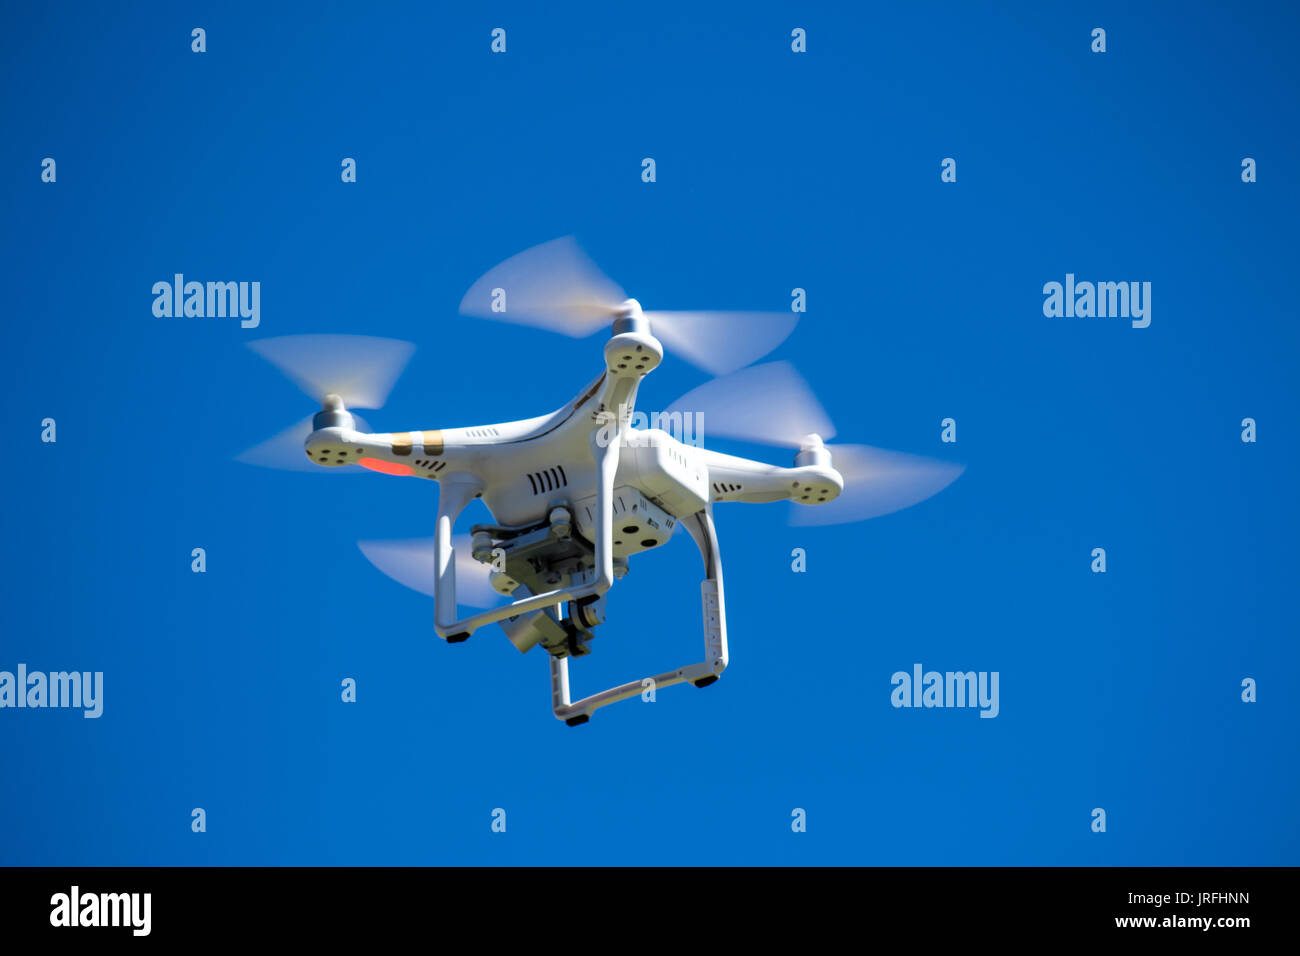 Drone or unmanned aerial vehicle in flight against blue sky Stock Photo